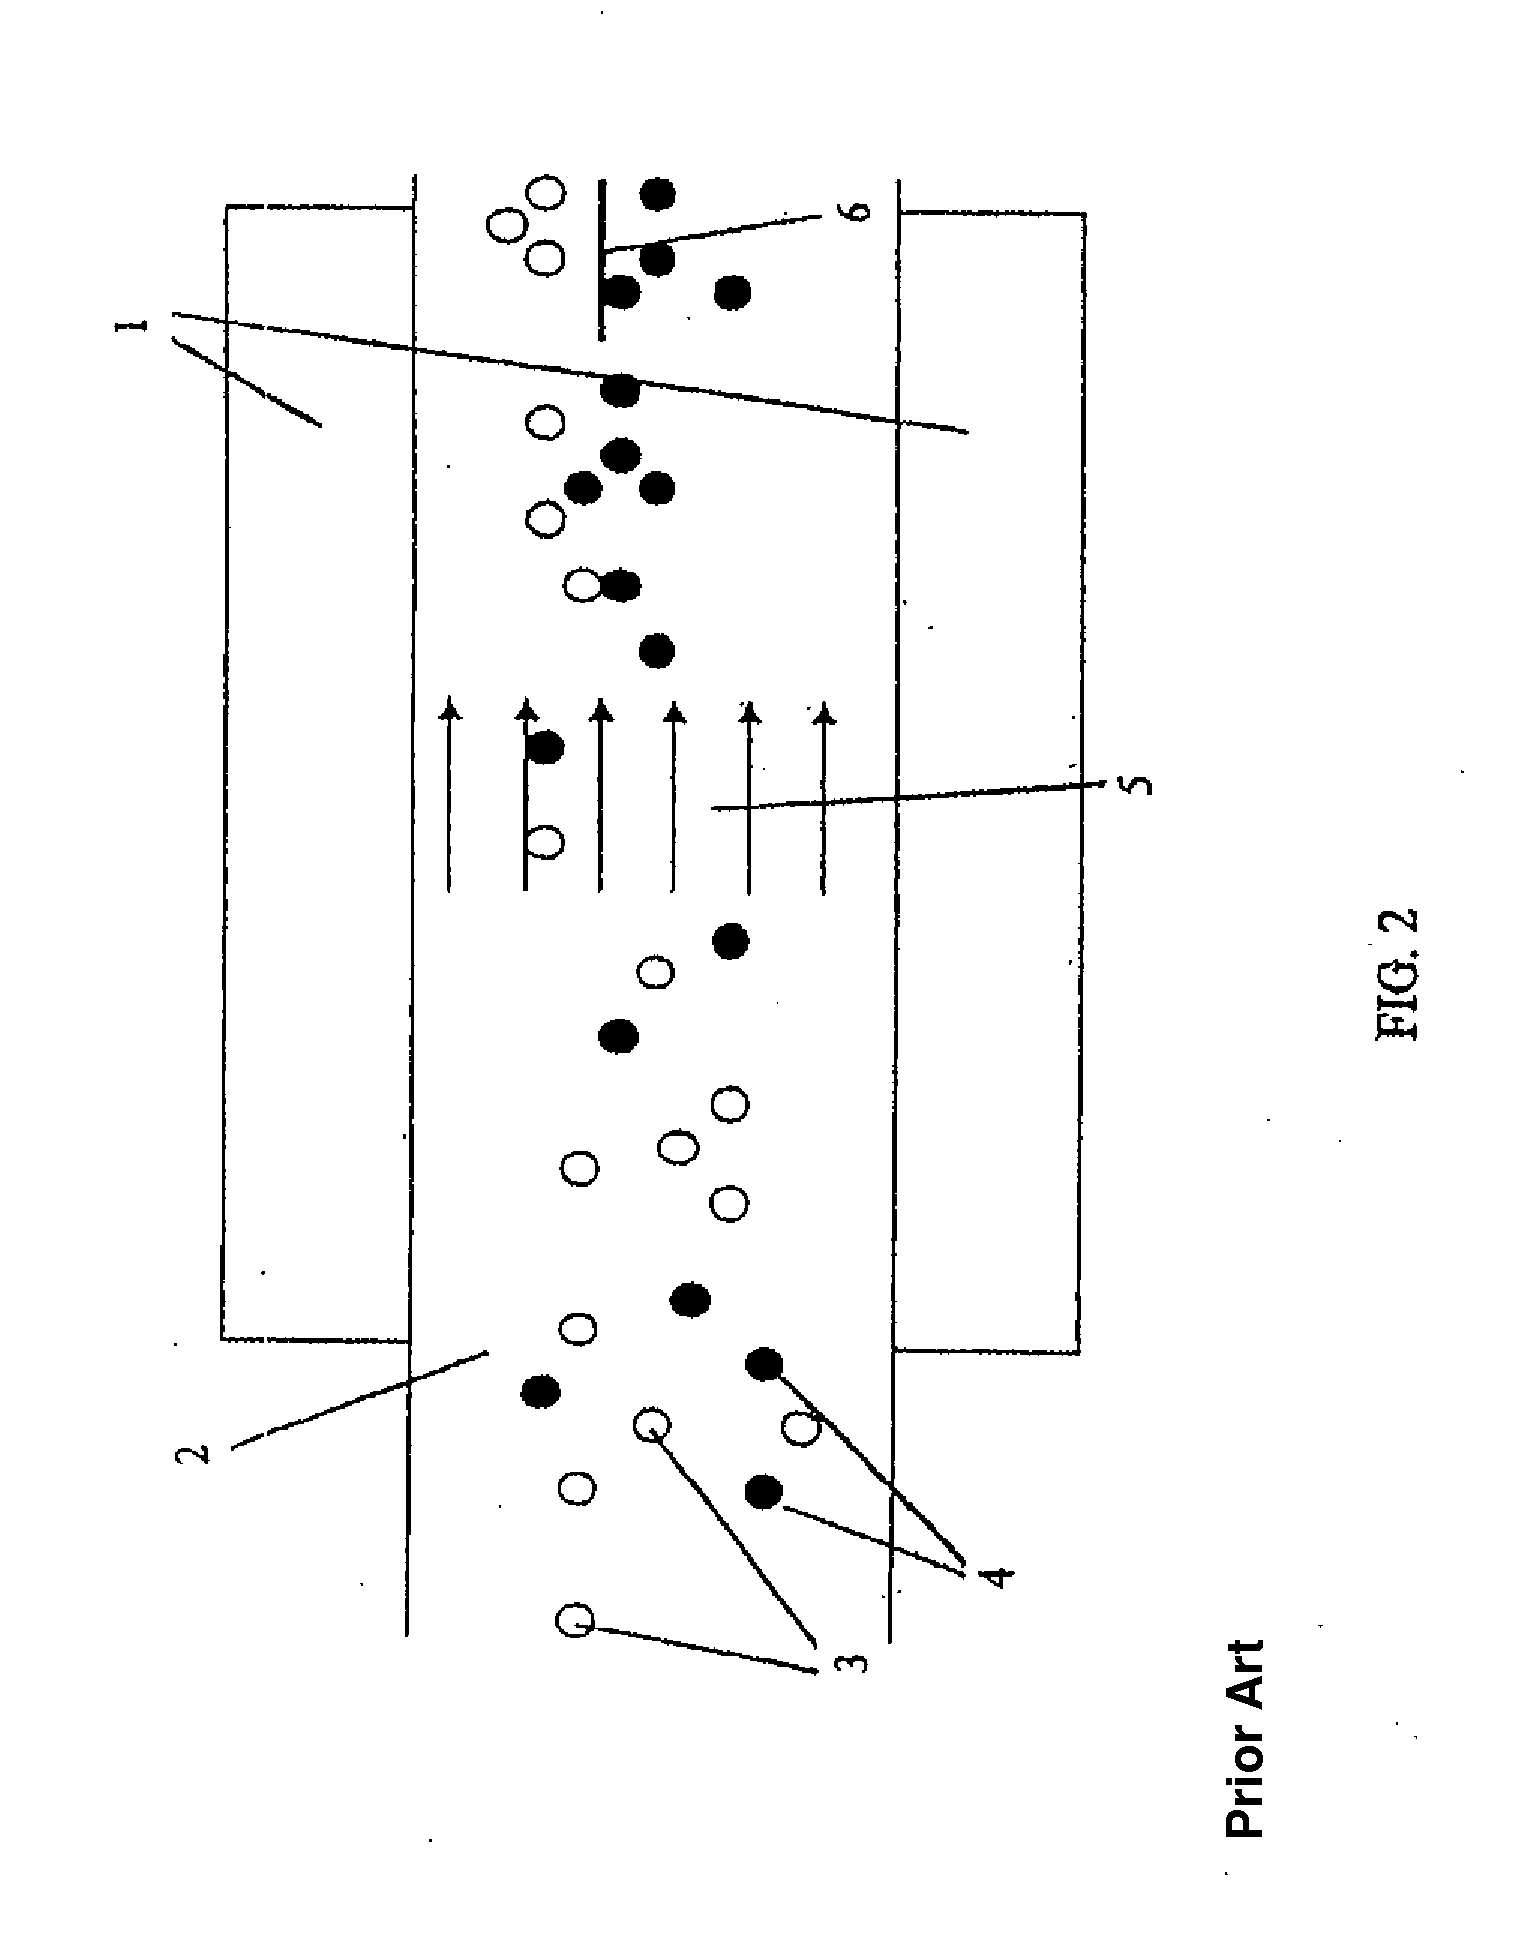 Method and Apparatus for the Separation of Solid Particles Having Different Densities